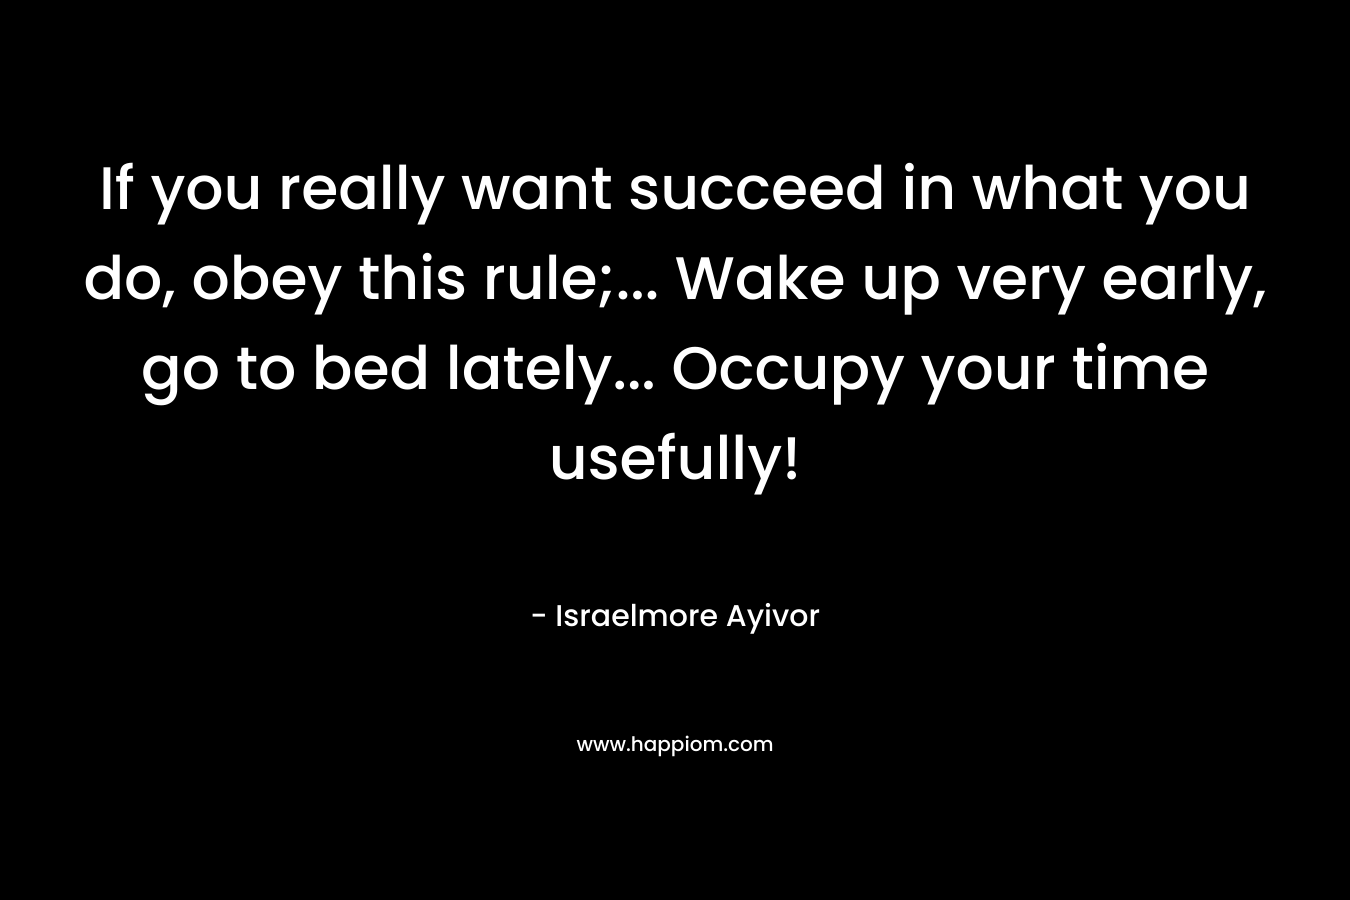 If you really want succeed in what you do, obey this rule;... Wake up very early, go to bed lately... Occupy your time usefully!